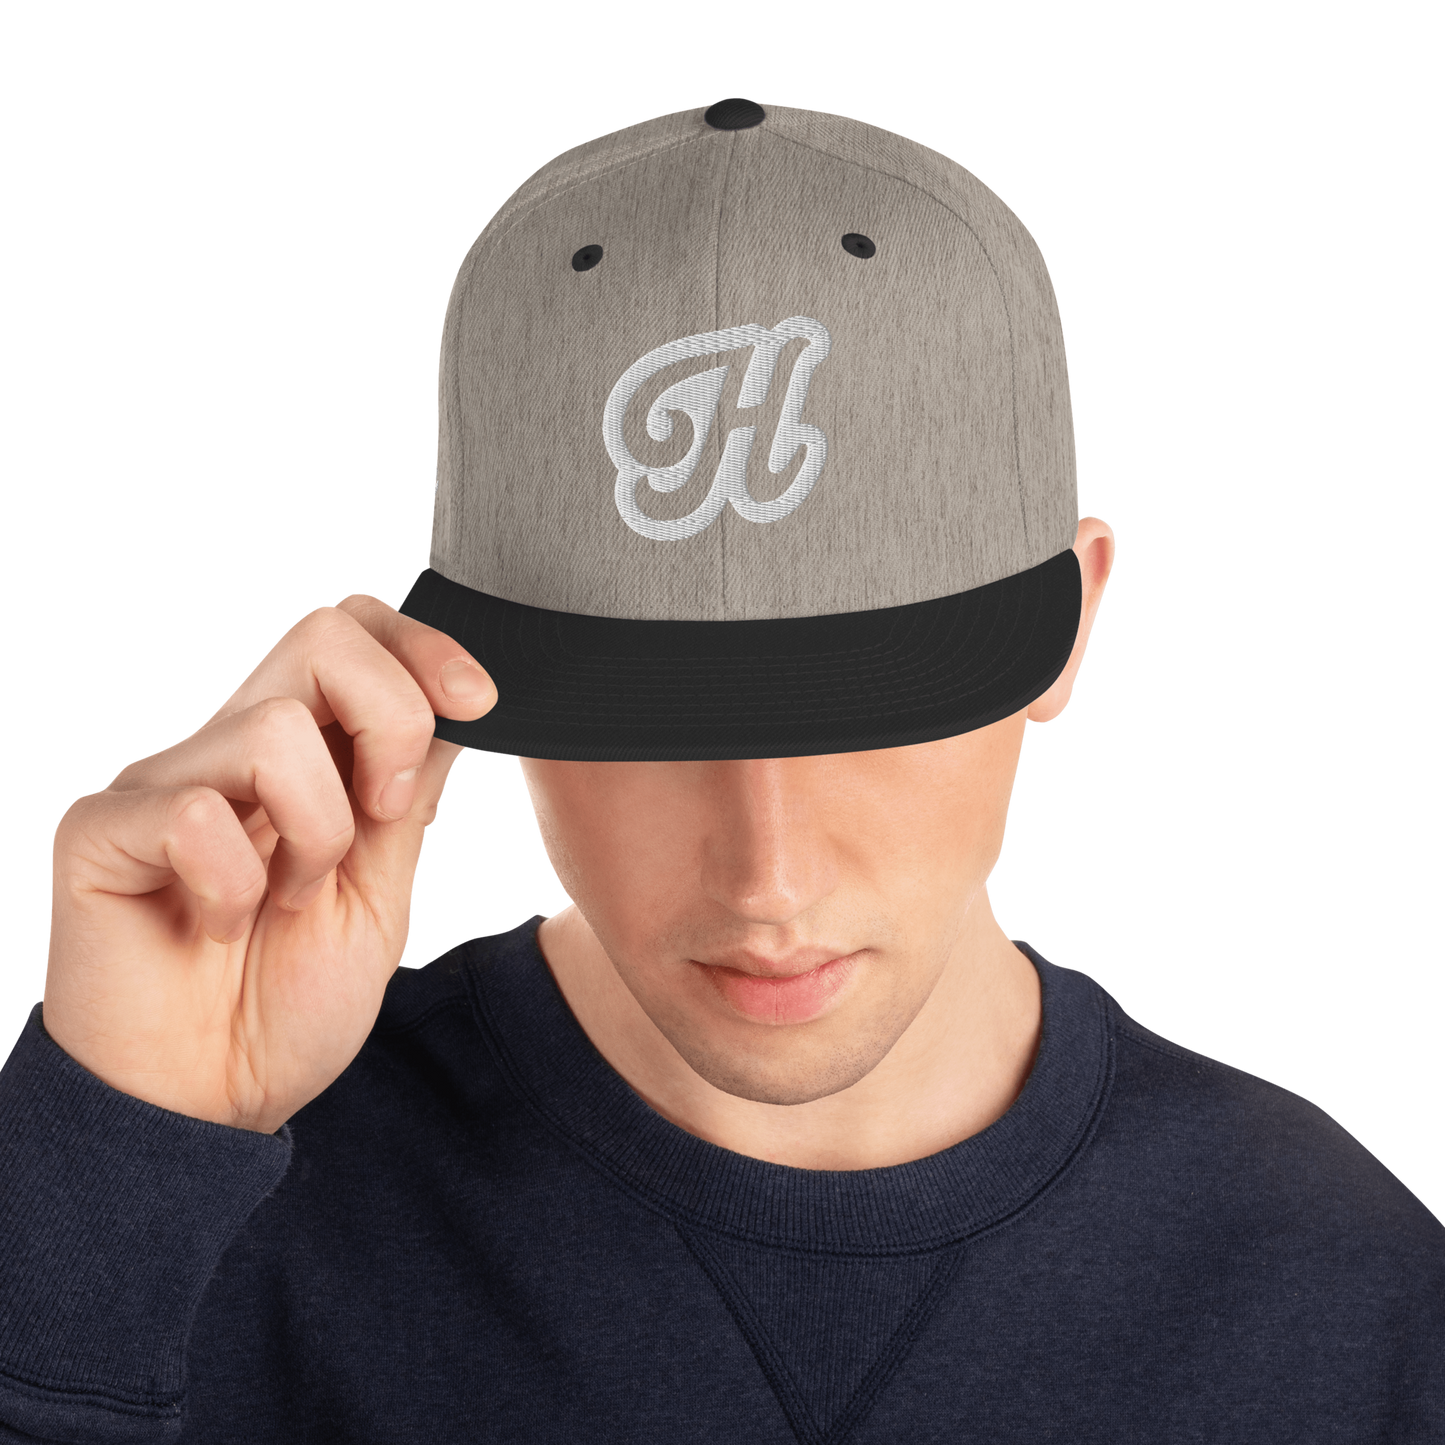 "The H" Snapback Hat